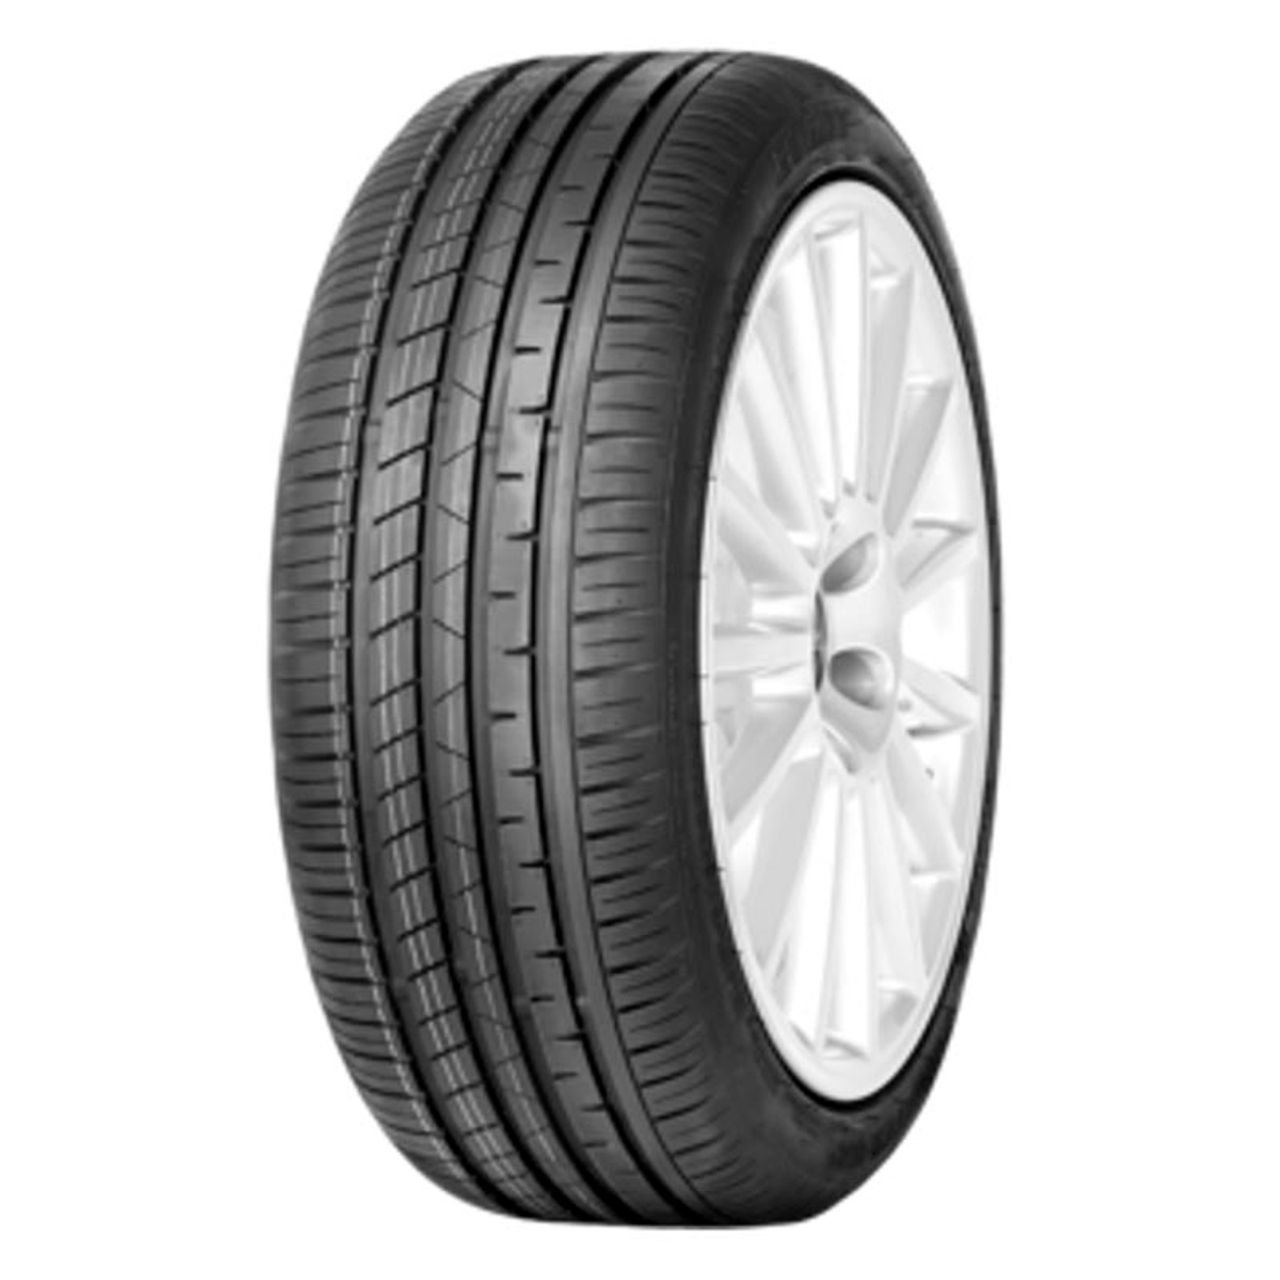 EVENT POTENTEM UHP 205/45R17 88W BSW